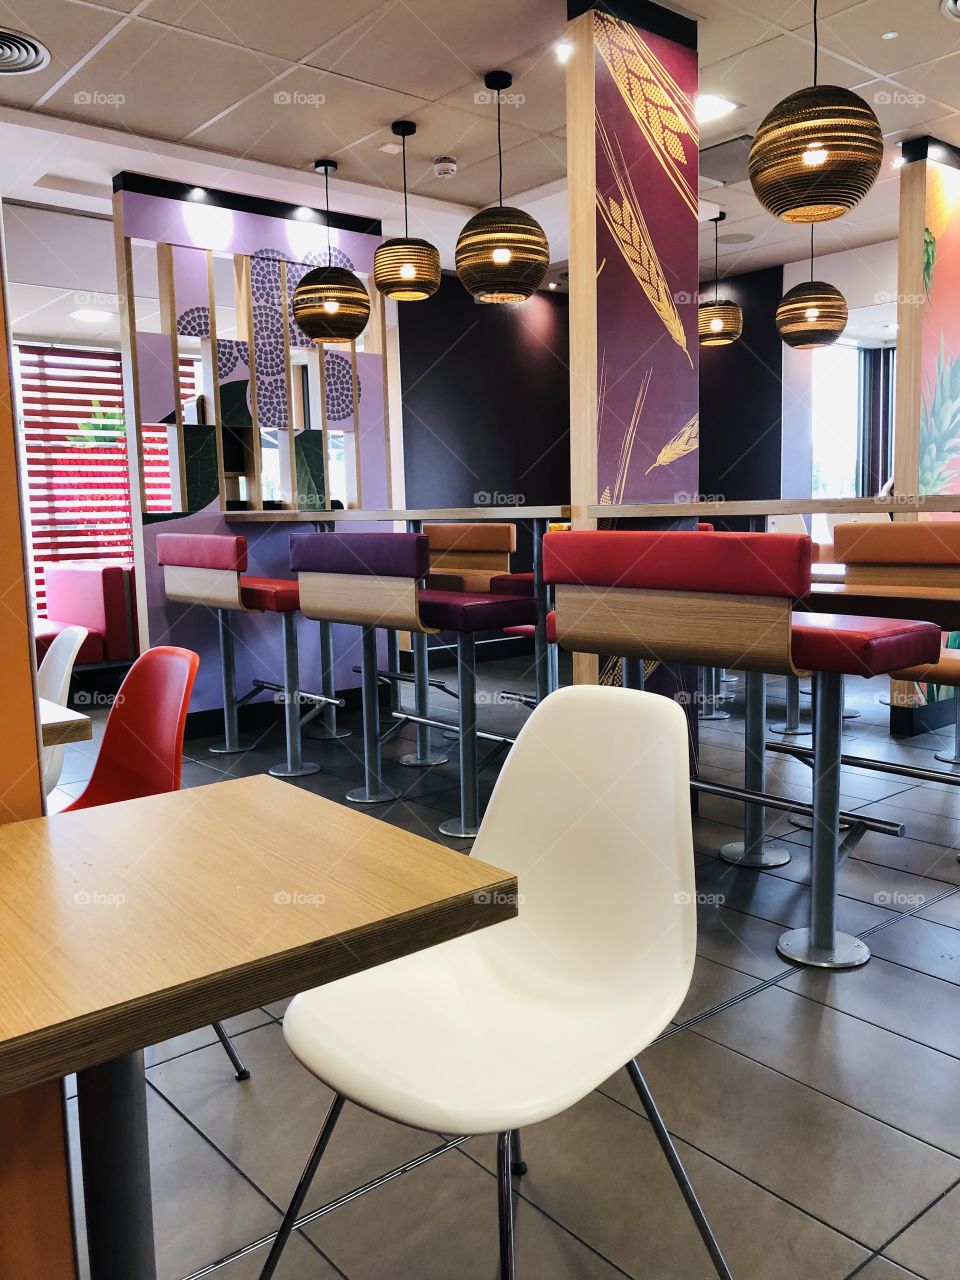 Inside McDonald’s ‘ Cardiff ‘ South Wales 🏴󠁧󠁢󠁷󠁬󠁳󠁿